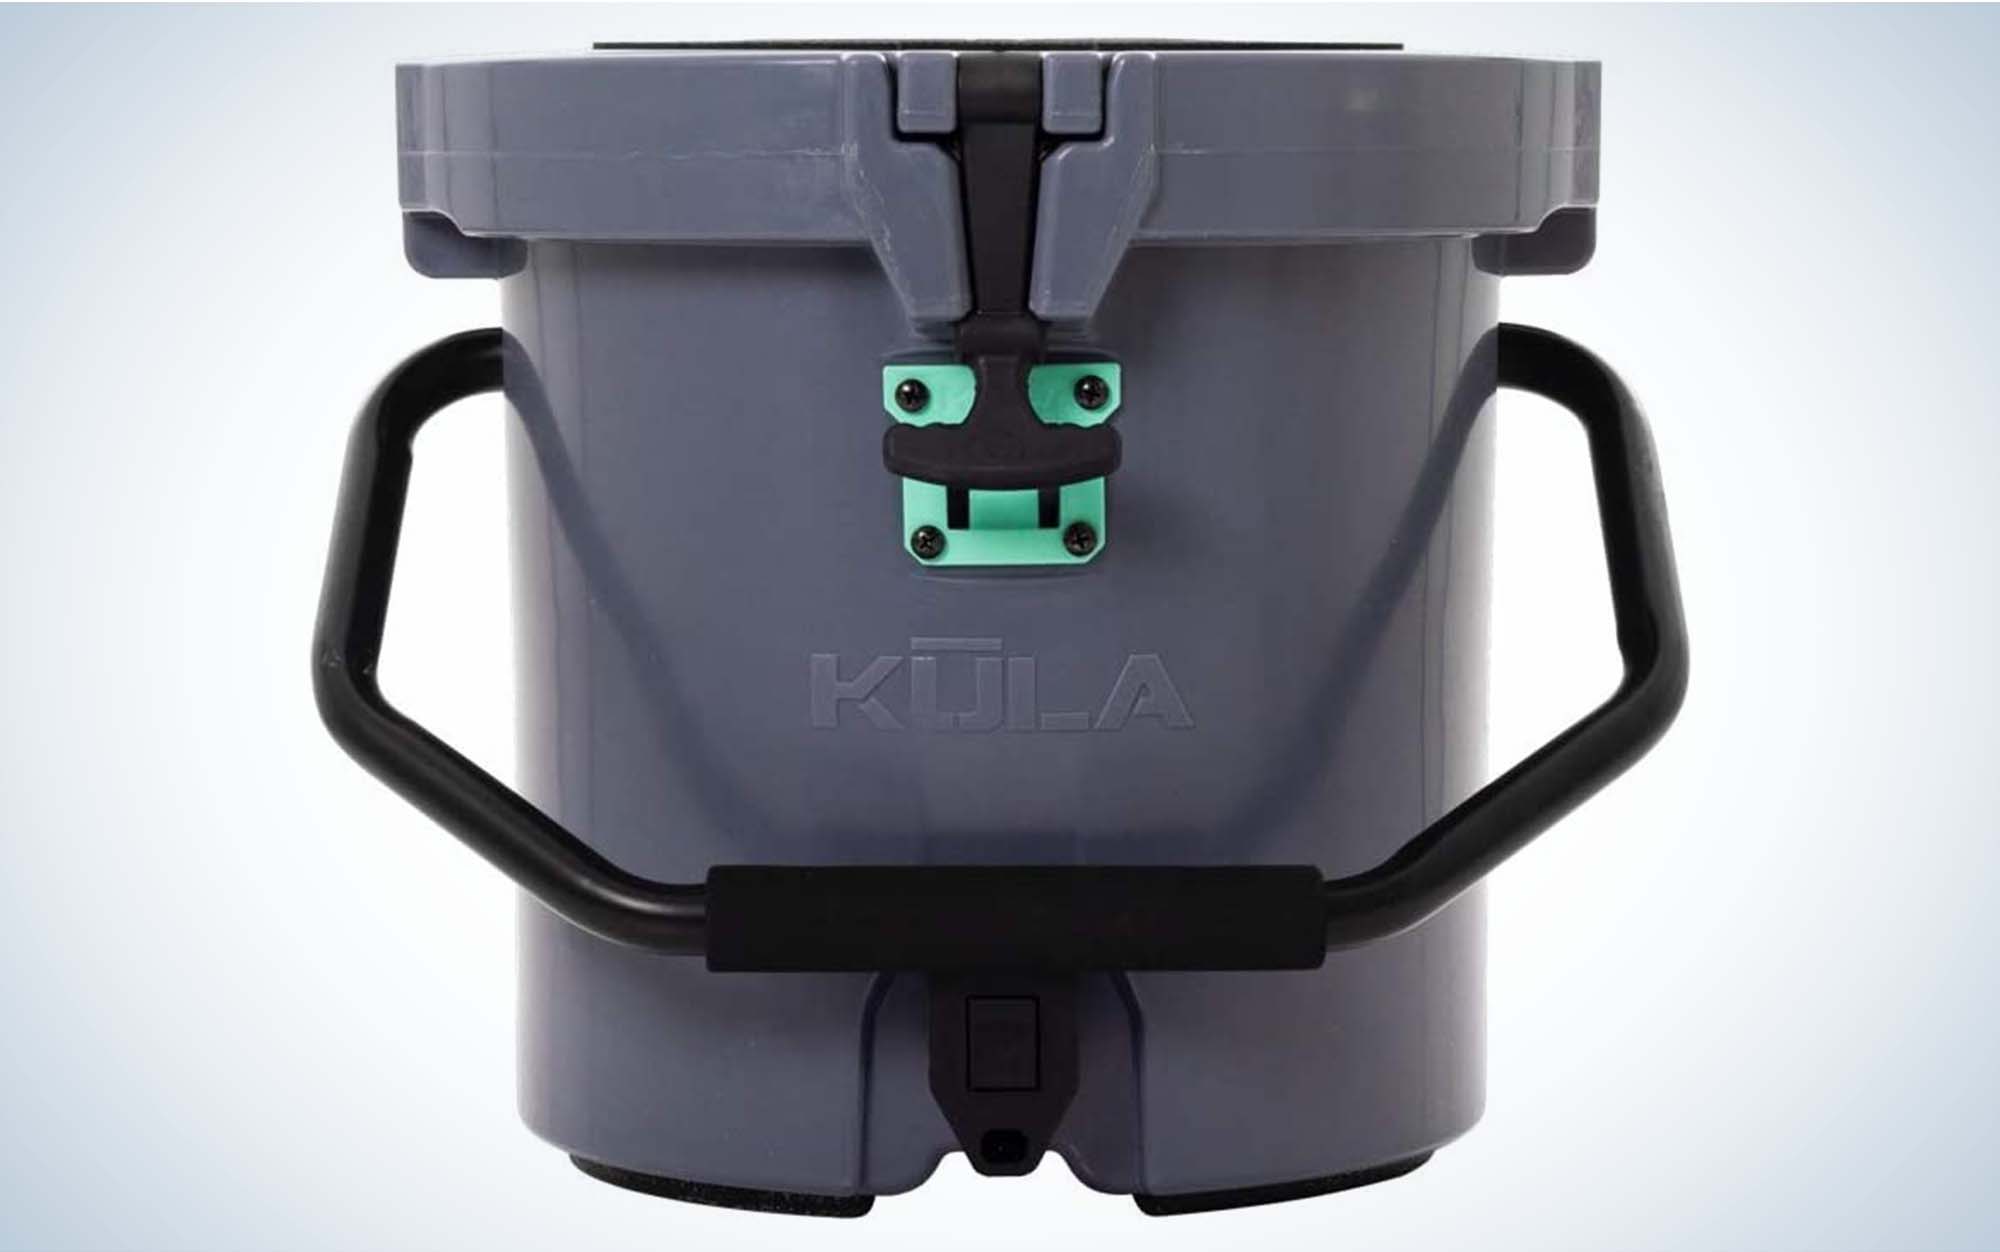 The Kula 2.5 is the best overall small cooler.